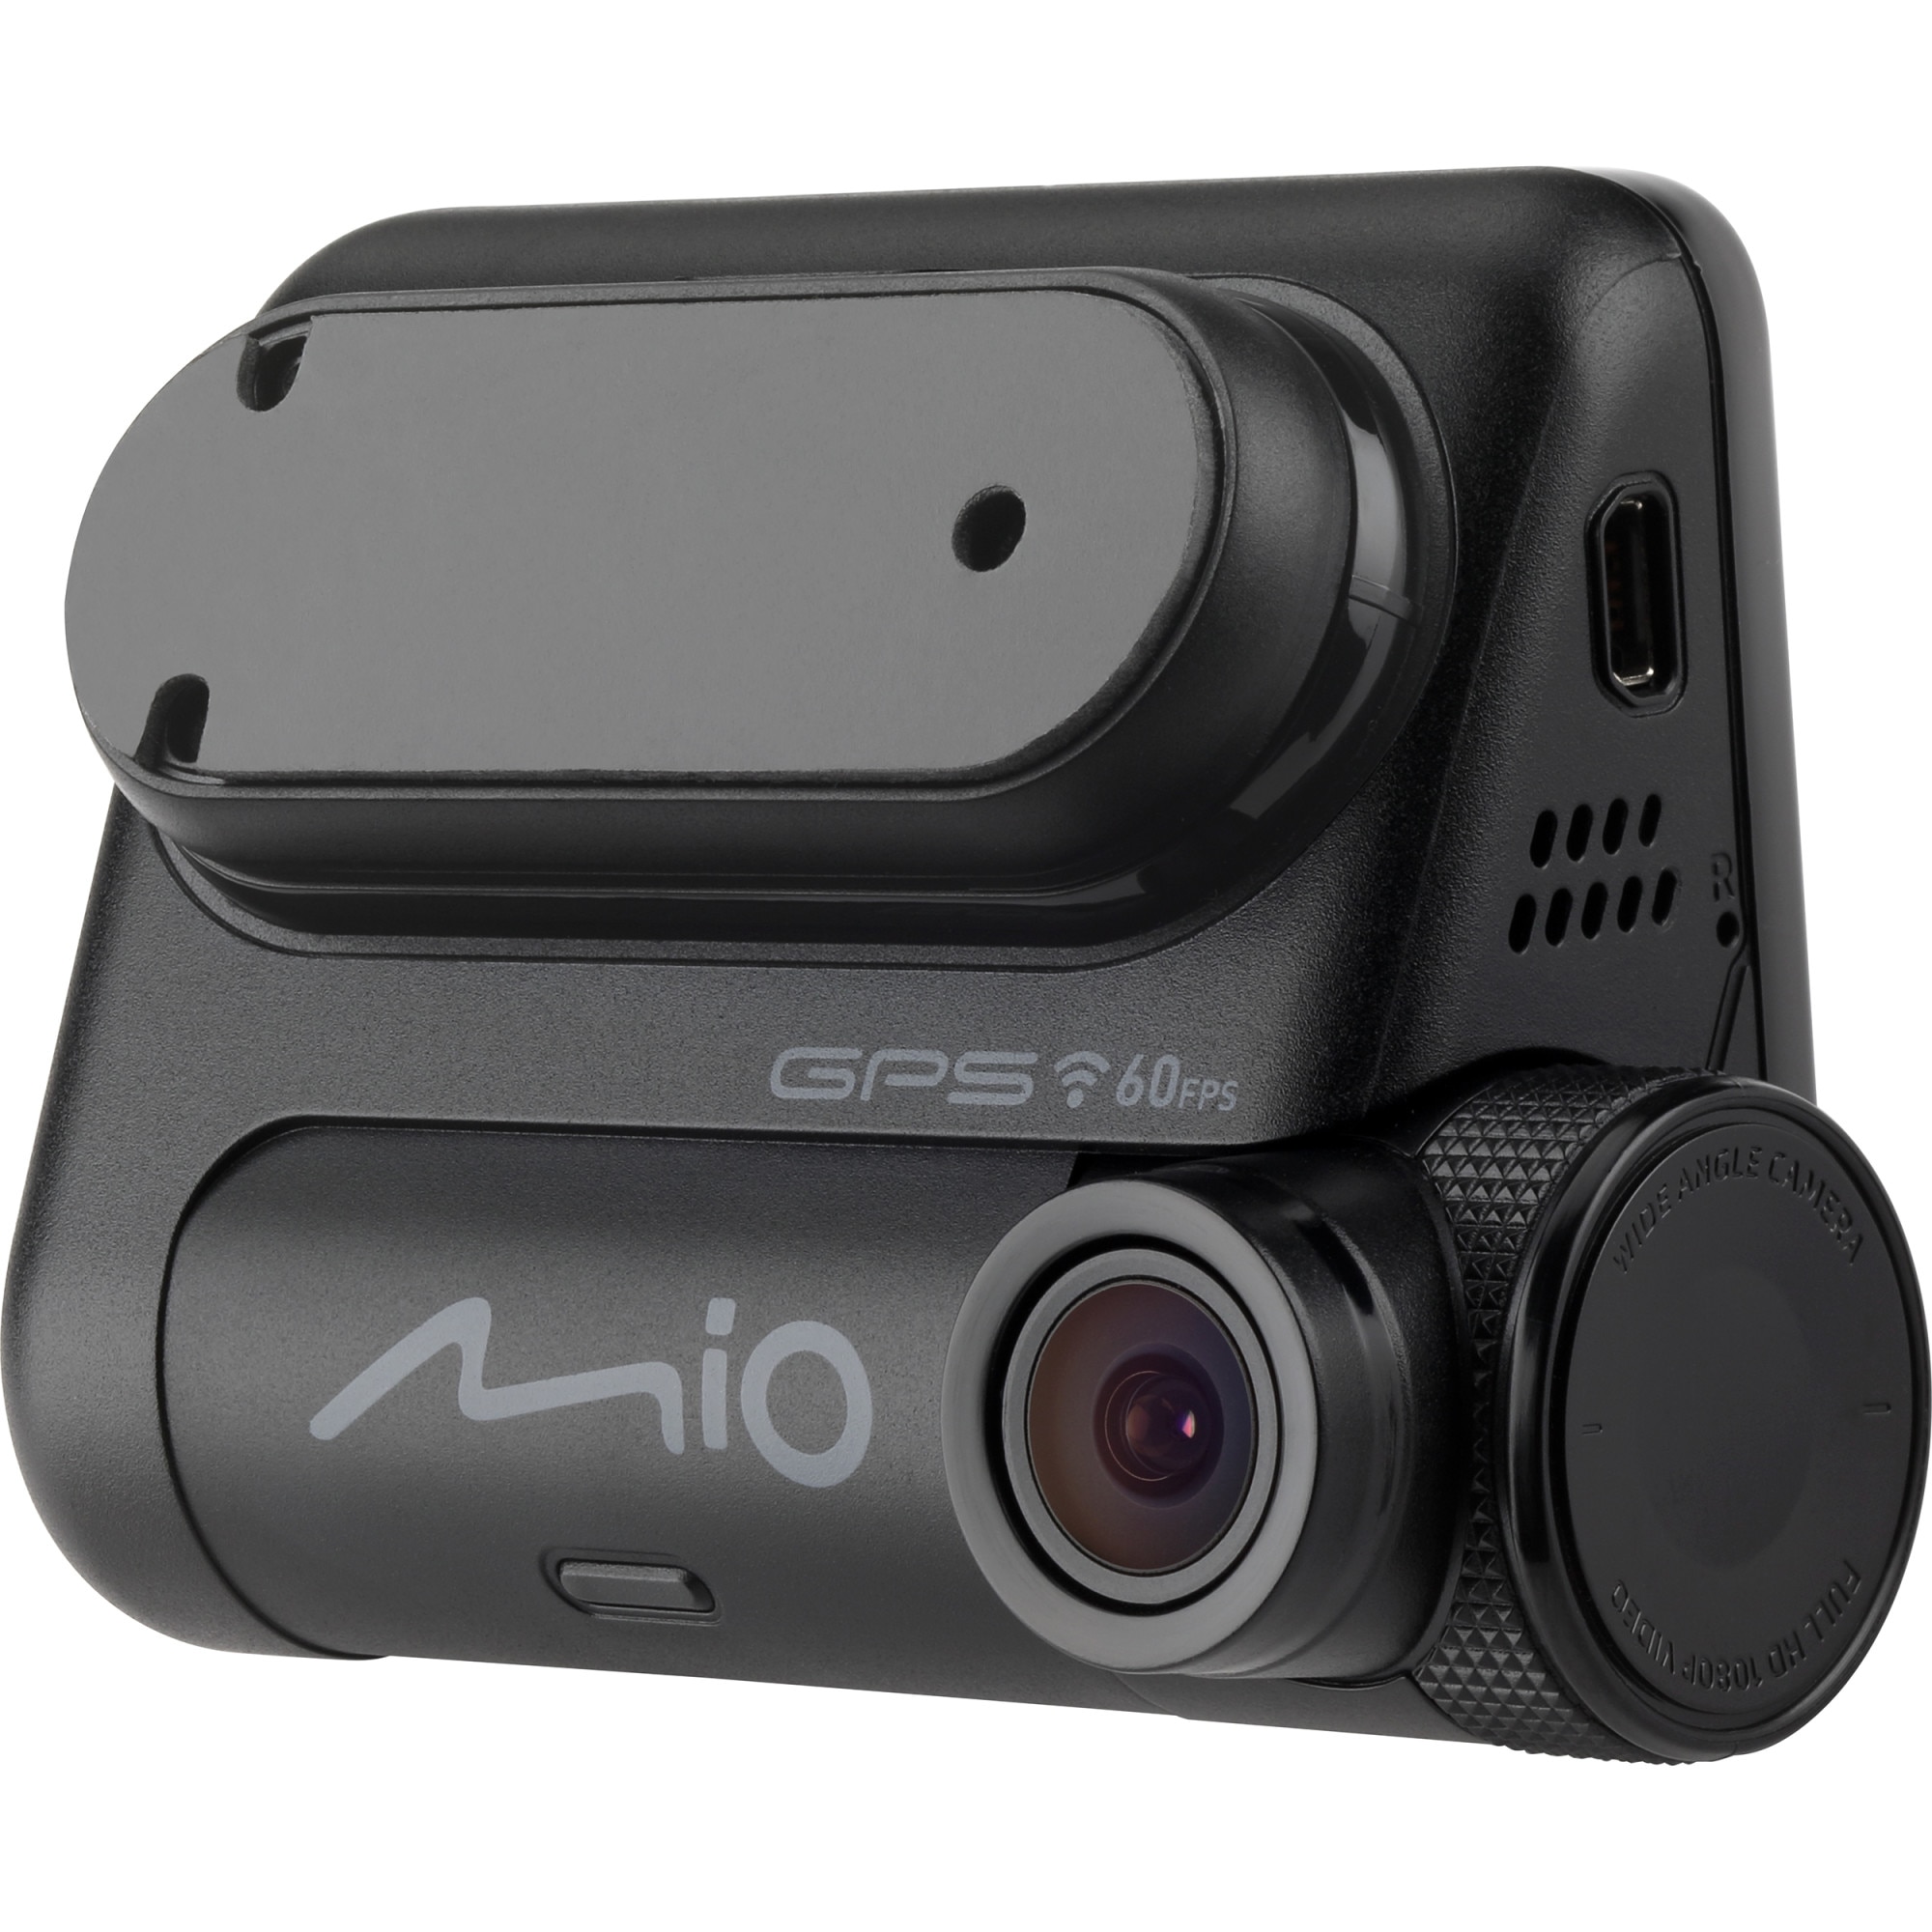 Pine package Concise Camera video auto Mio MiVue 826, Full HD, GPS, WIFI, ADAS - eMAG.ro